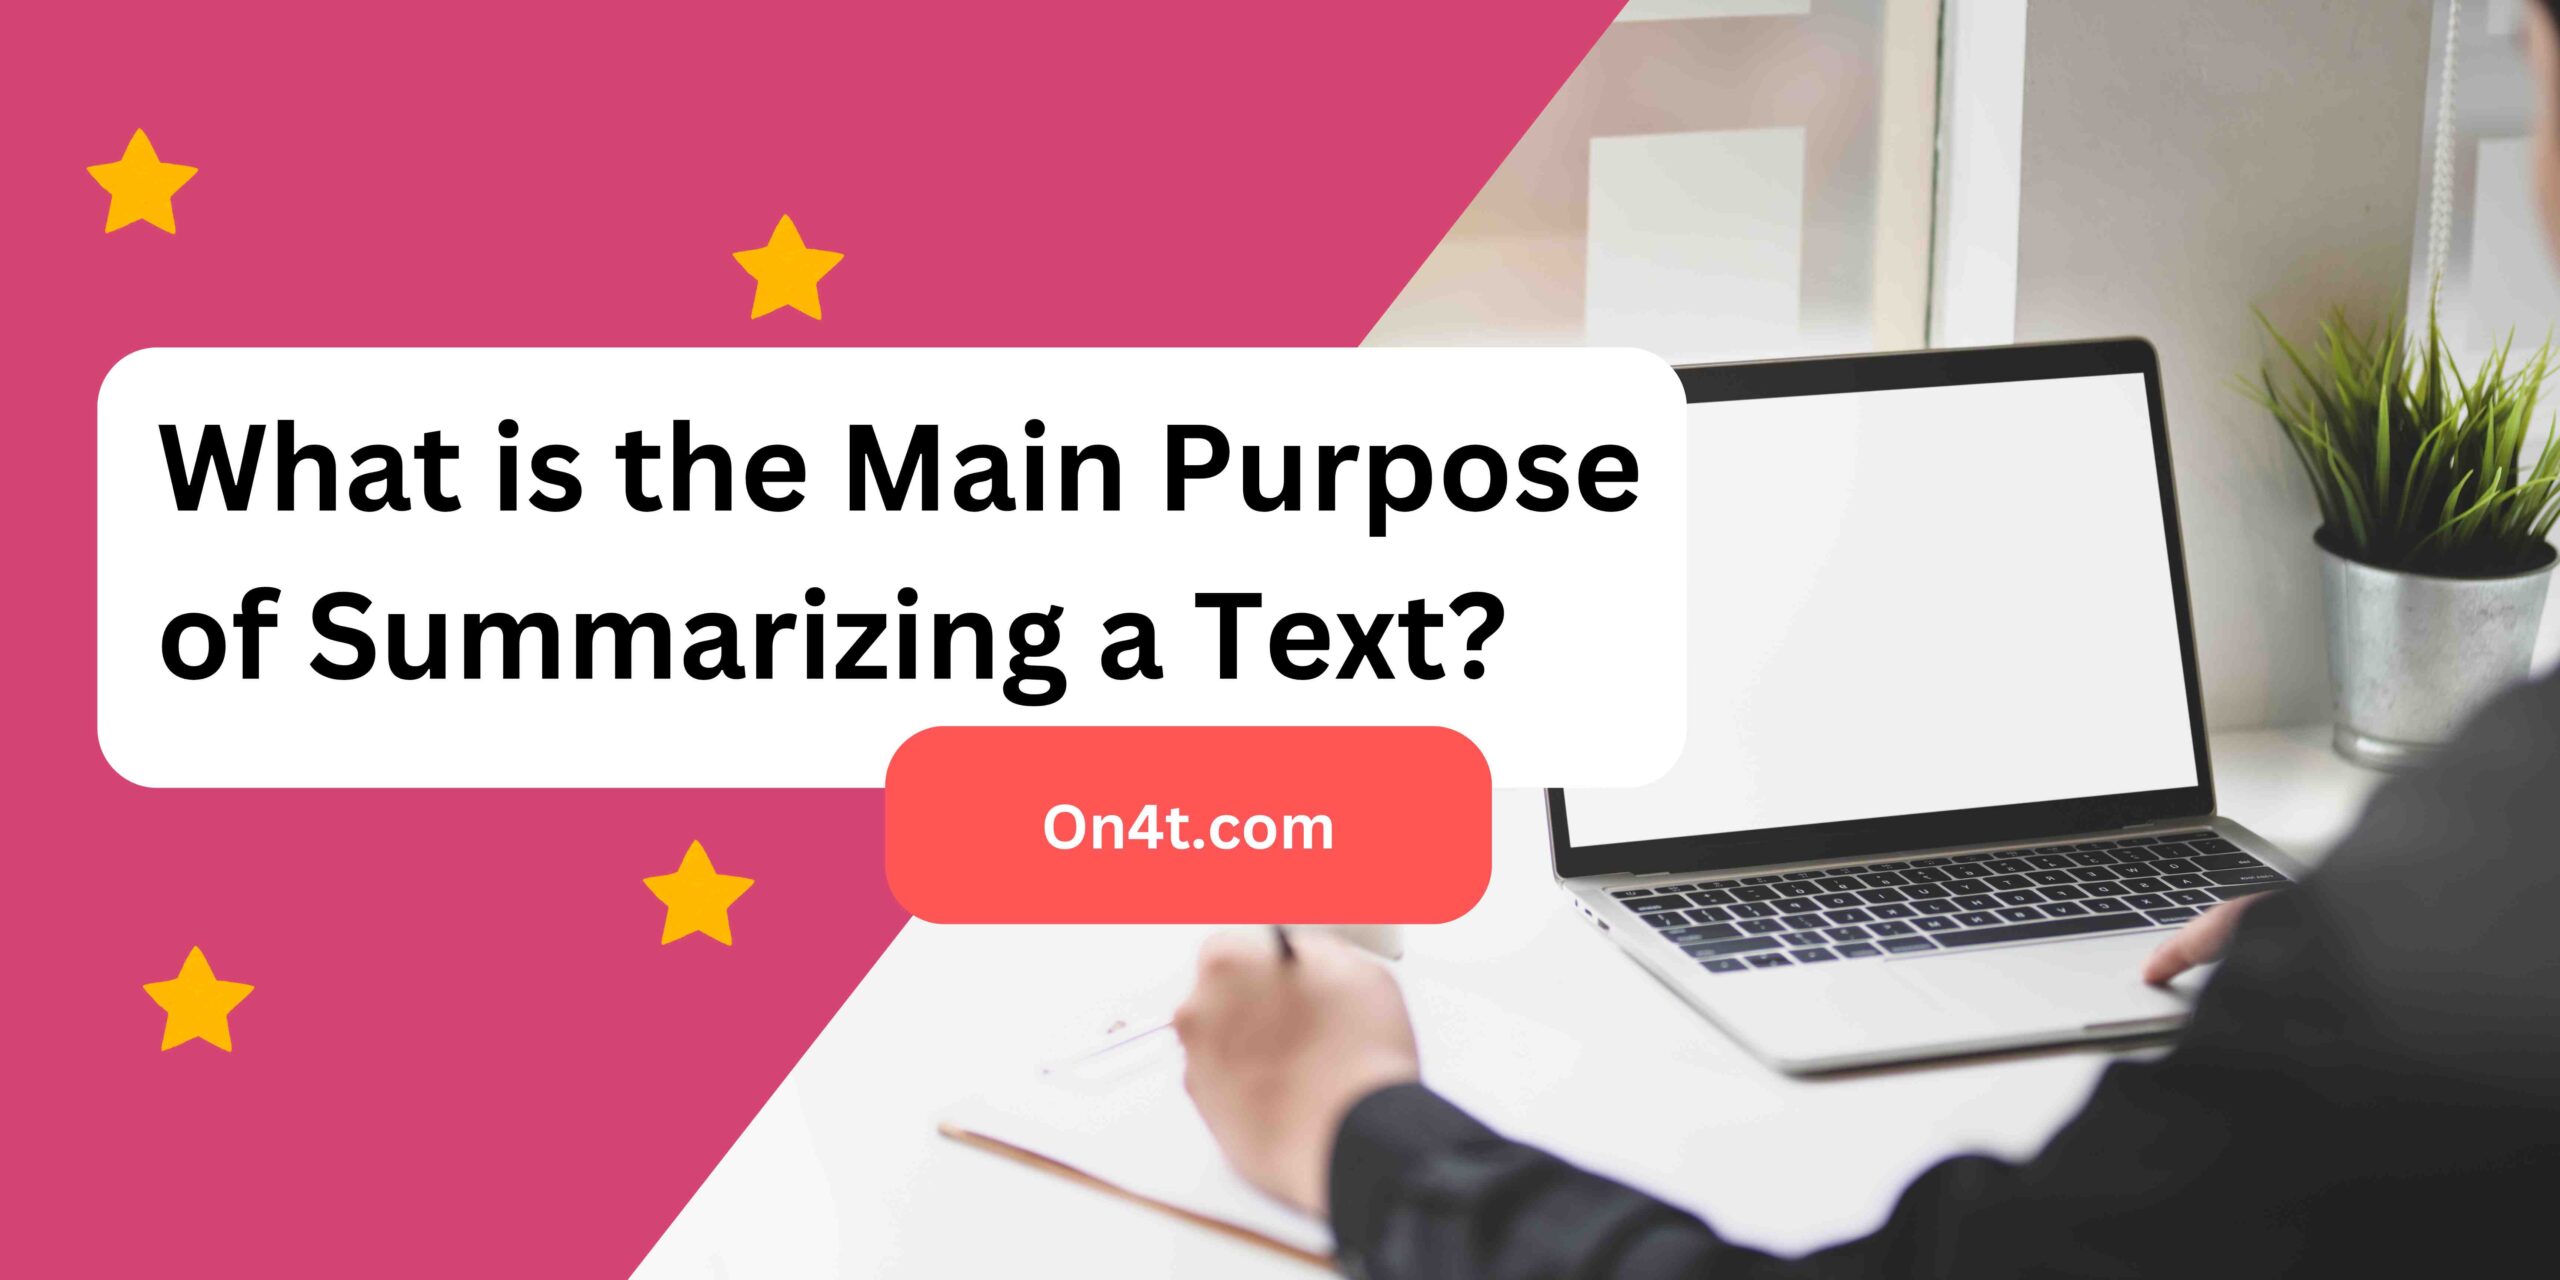 What is the Main Purpose of Summarizing a Text